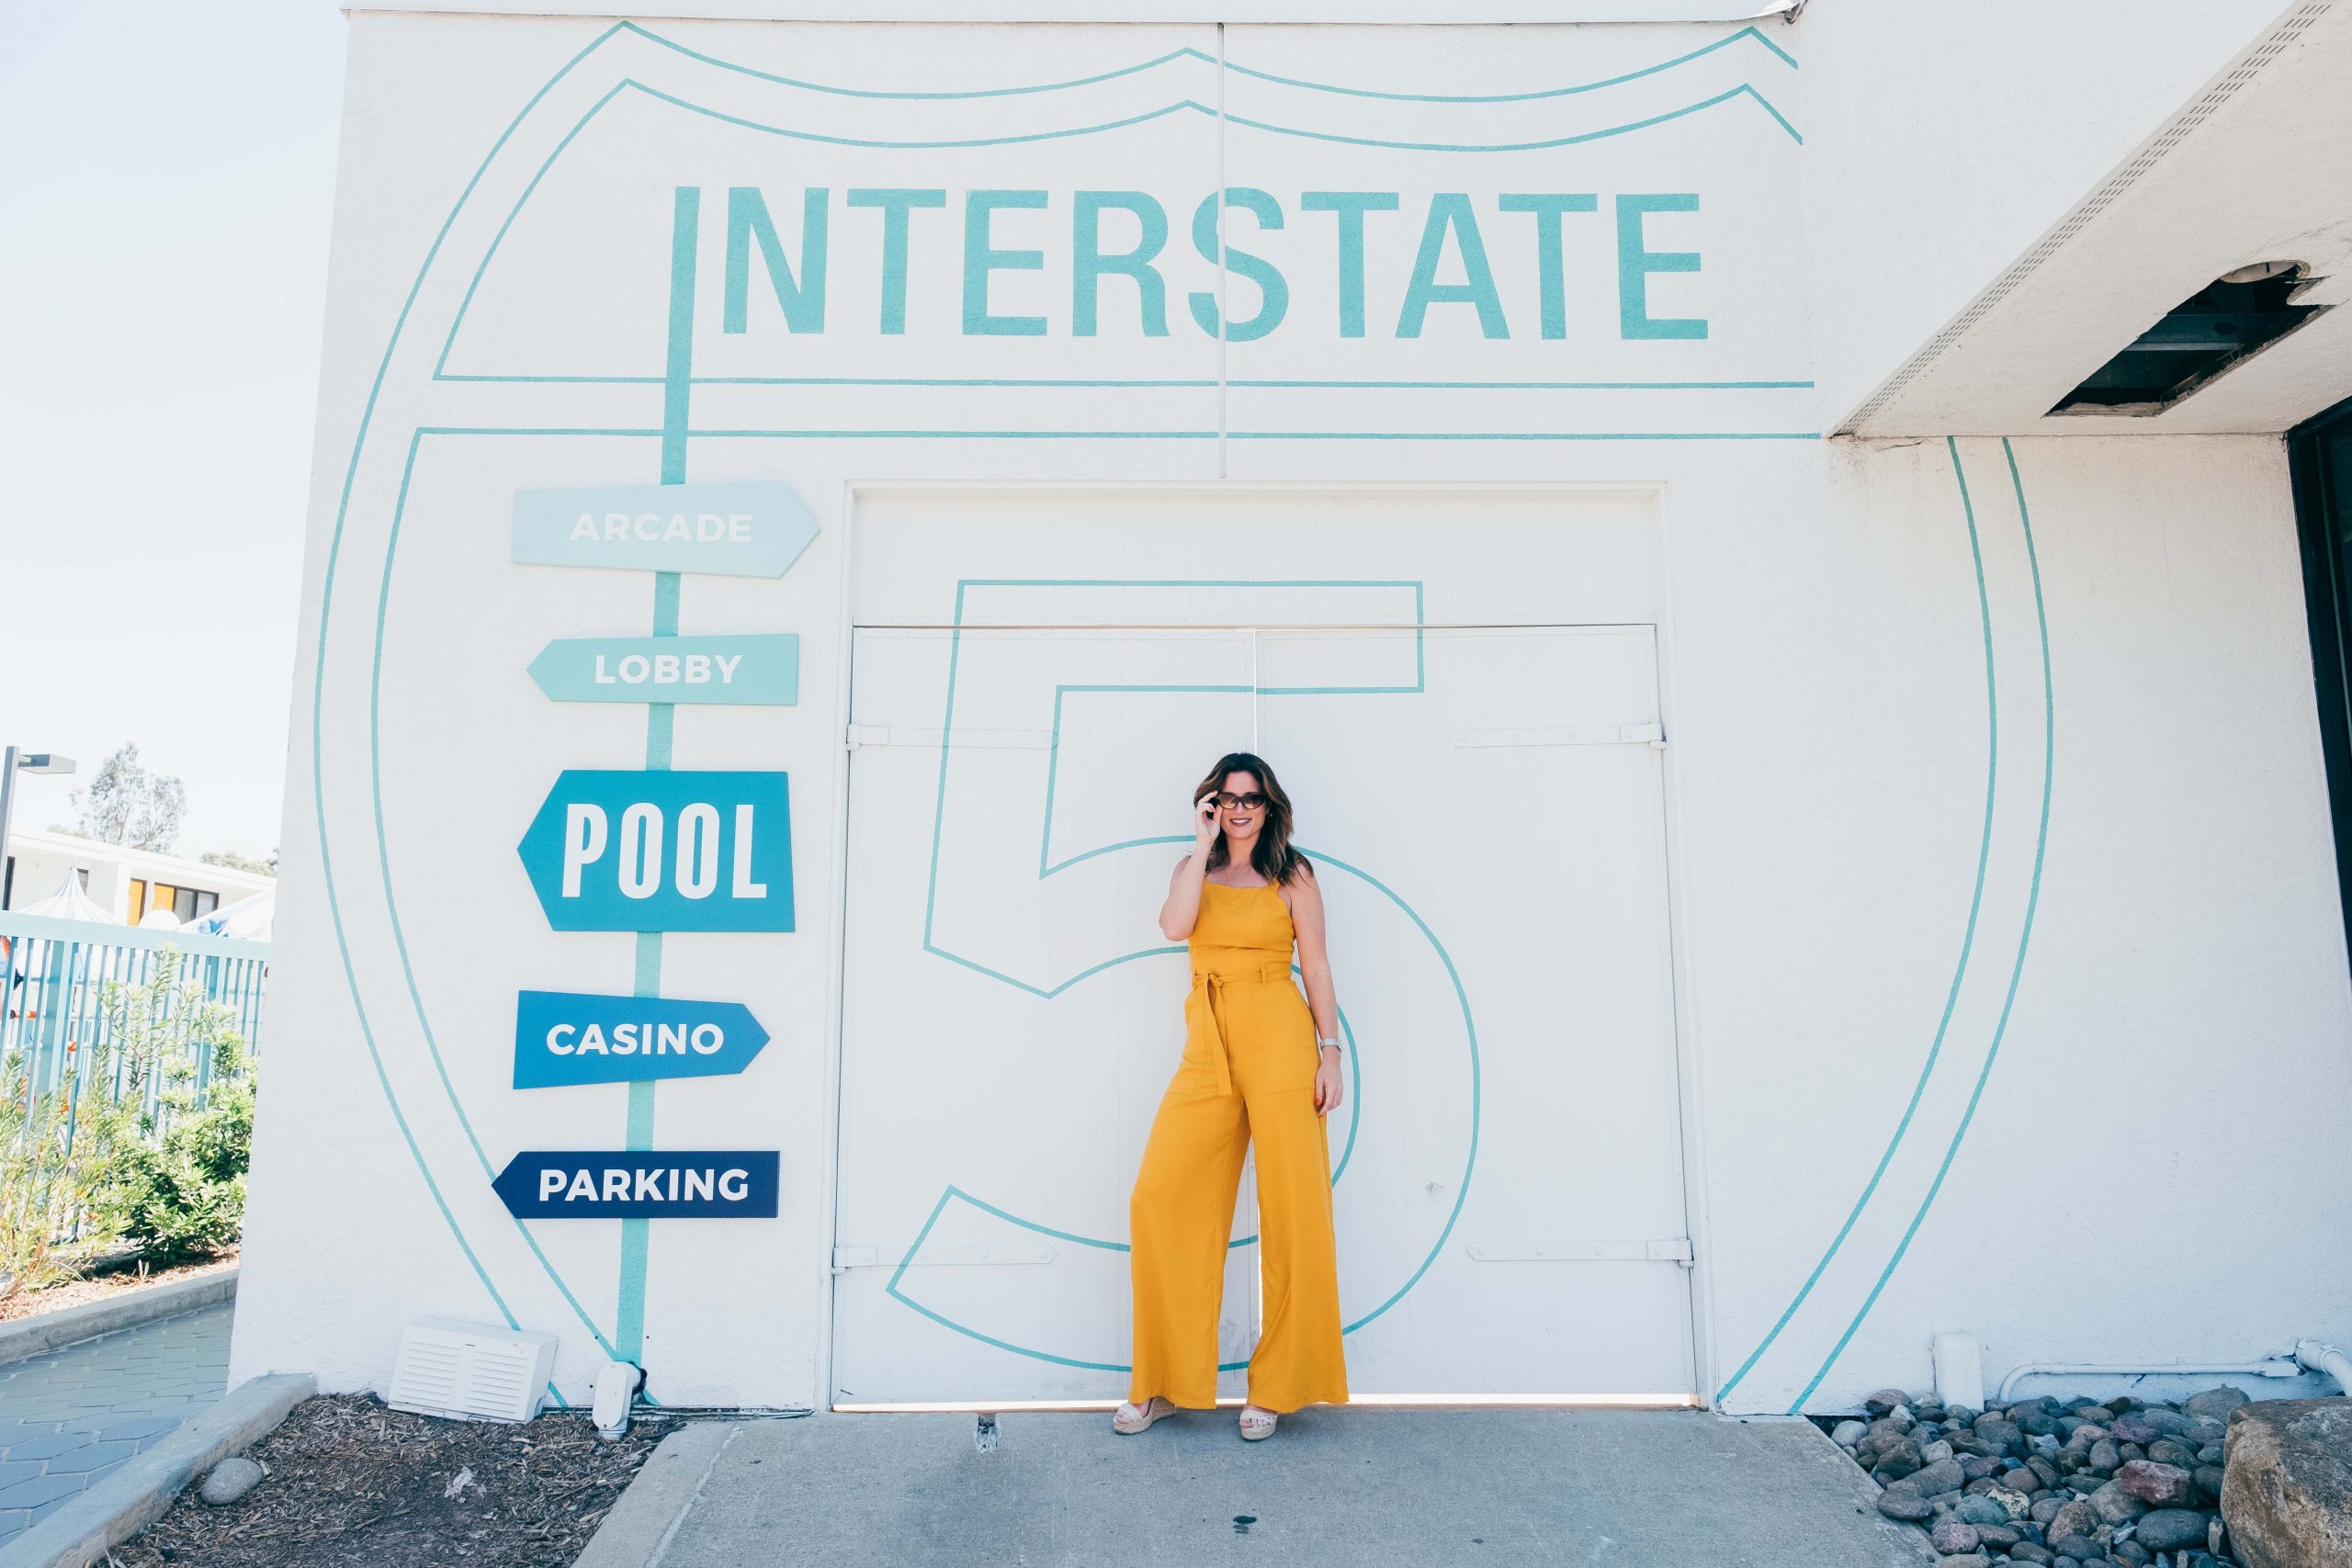 Girl in yellow standing in front of Interstate way-finding sign